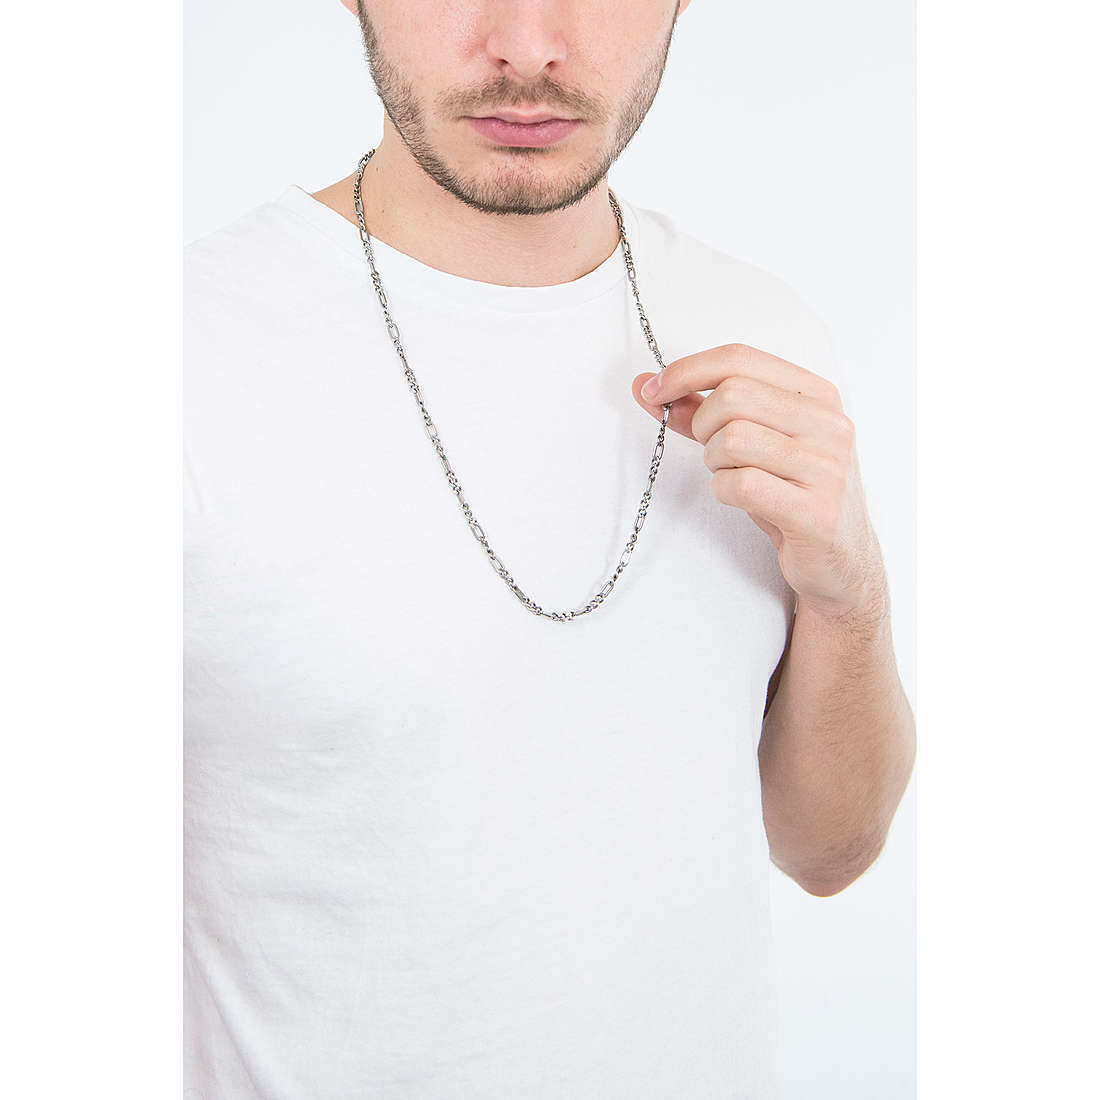 Fossil necklaces Dress man JF03175040 wearing